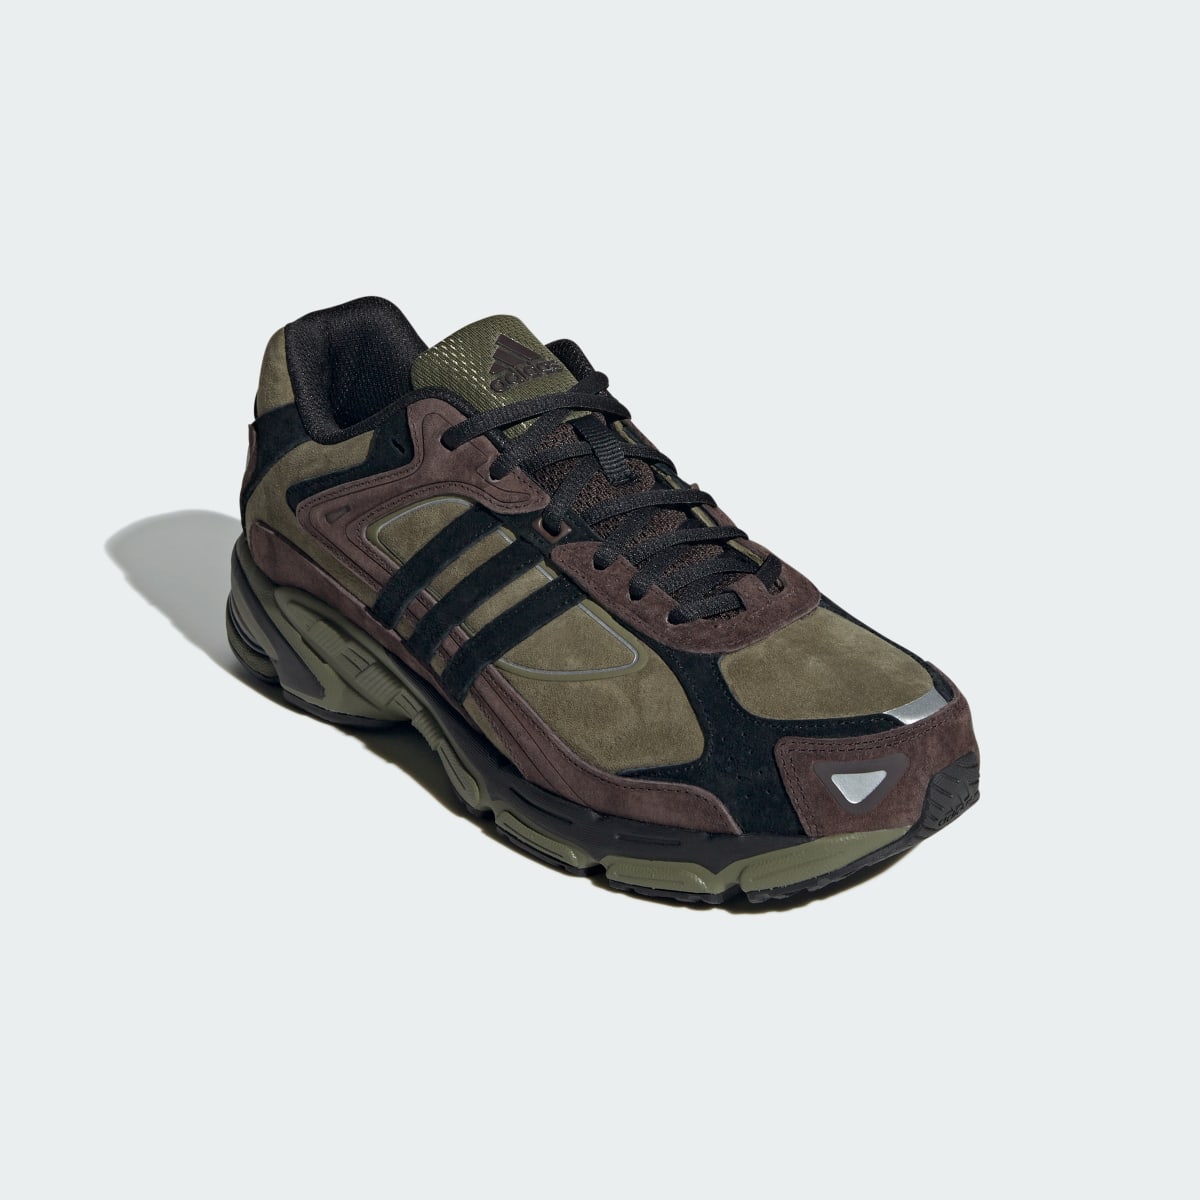 Adidas Response CL Shoes. 5